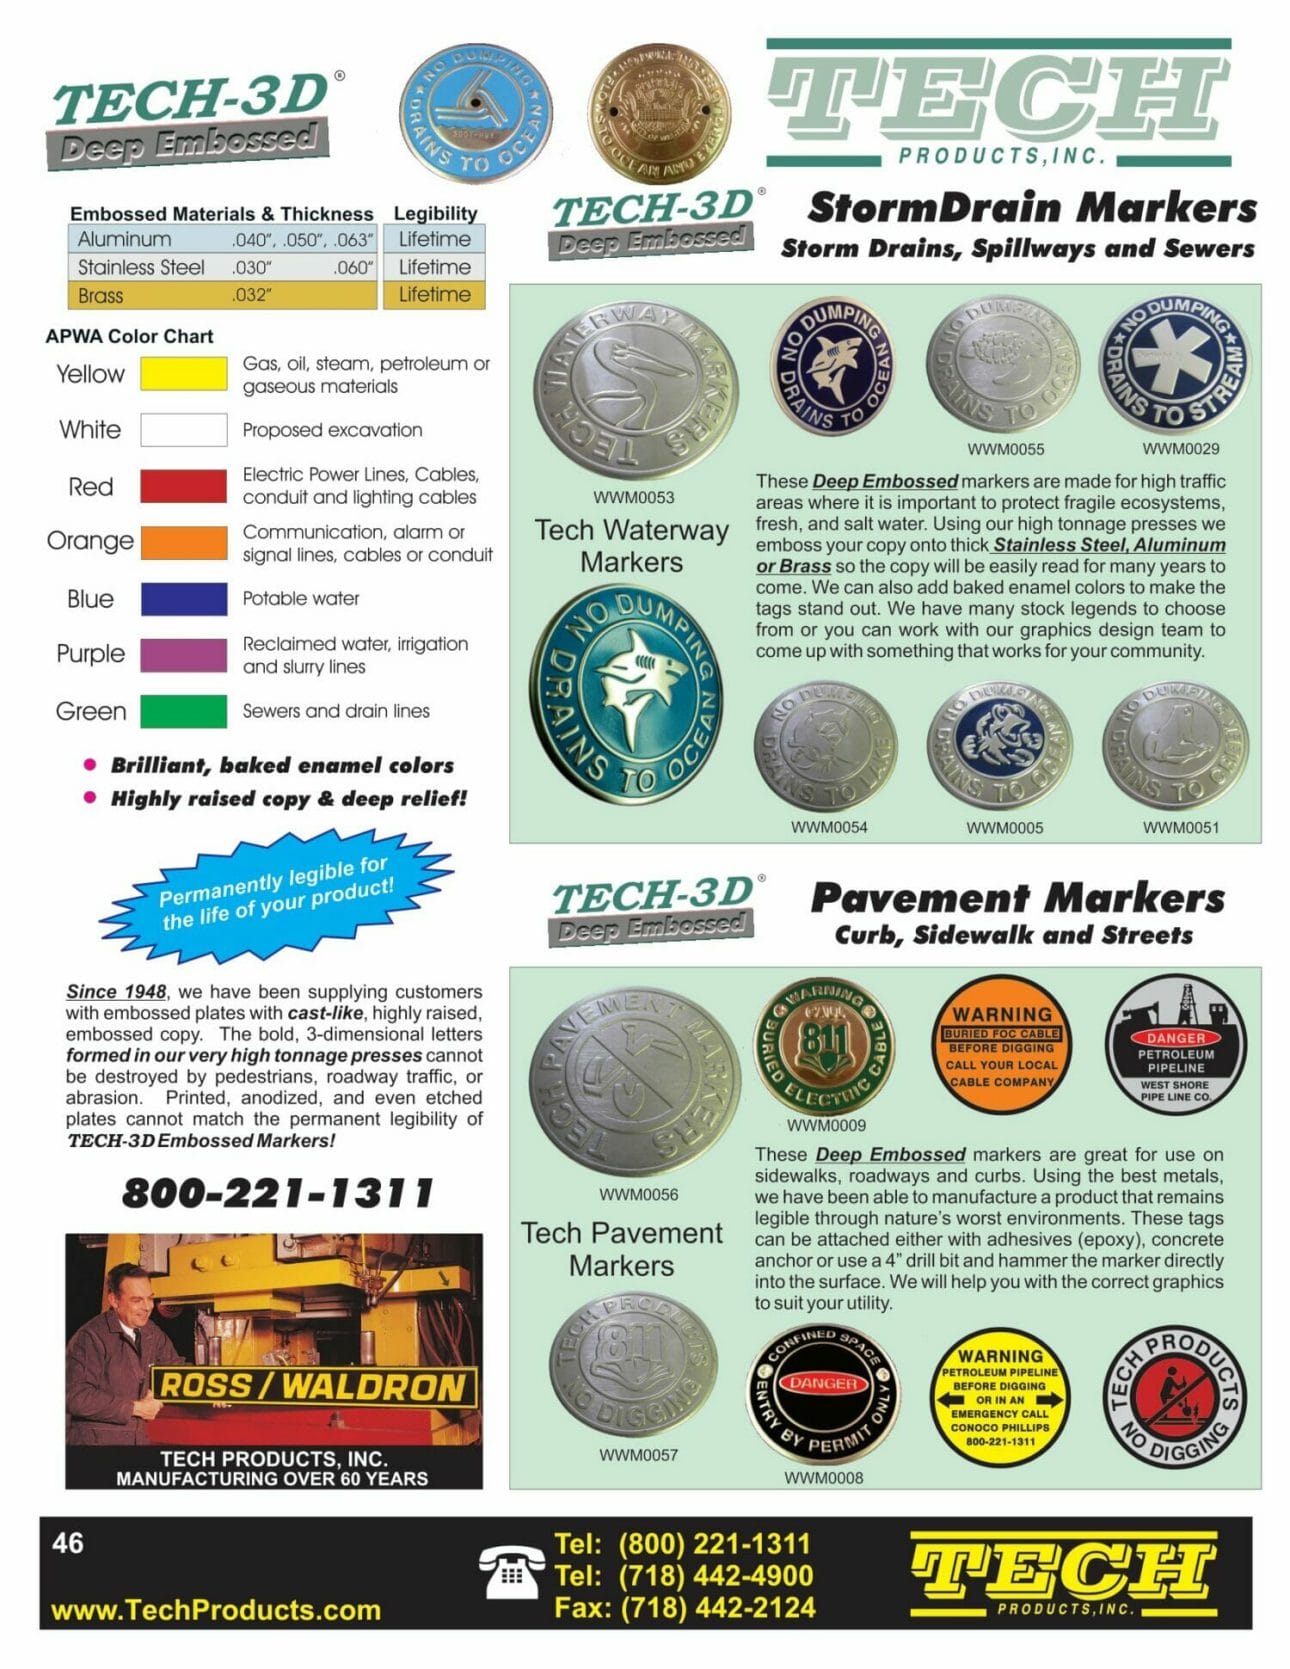 pavement markers catalog page from Tech Products